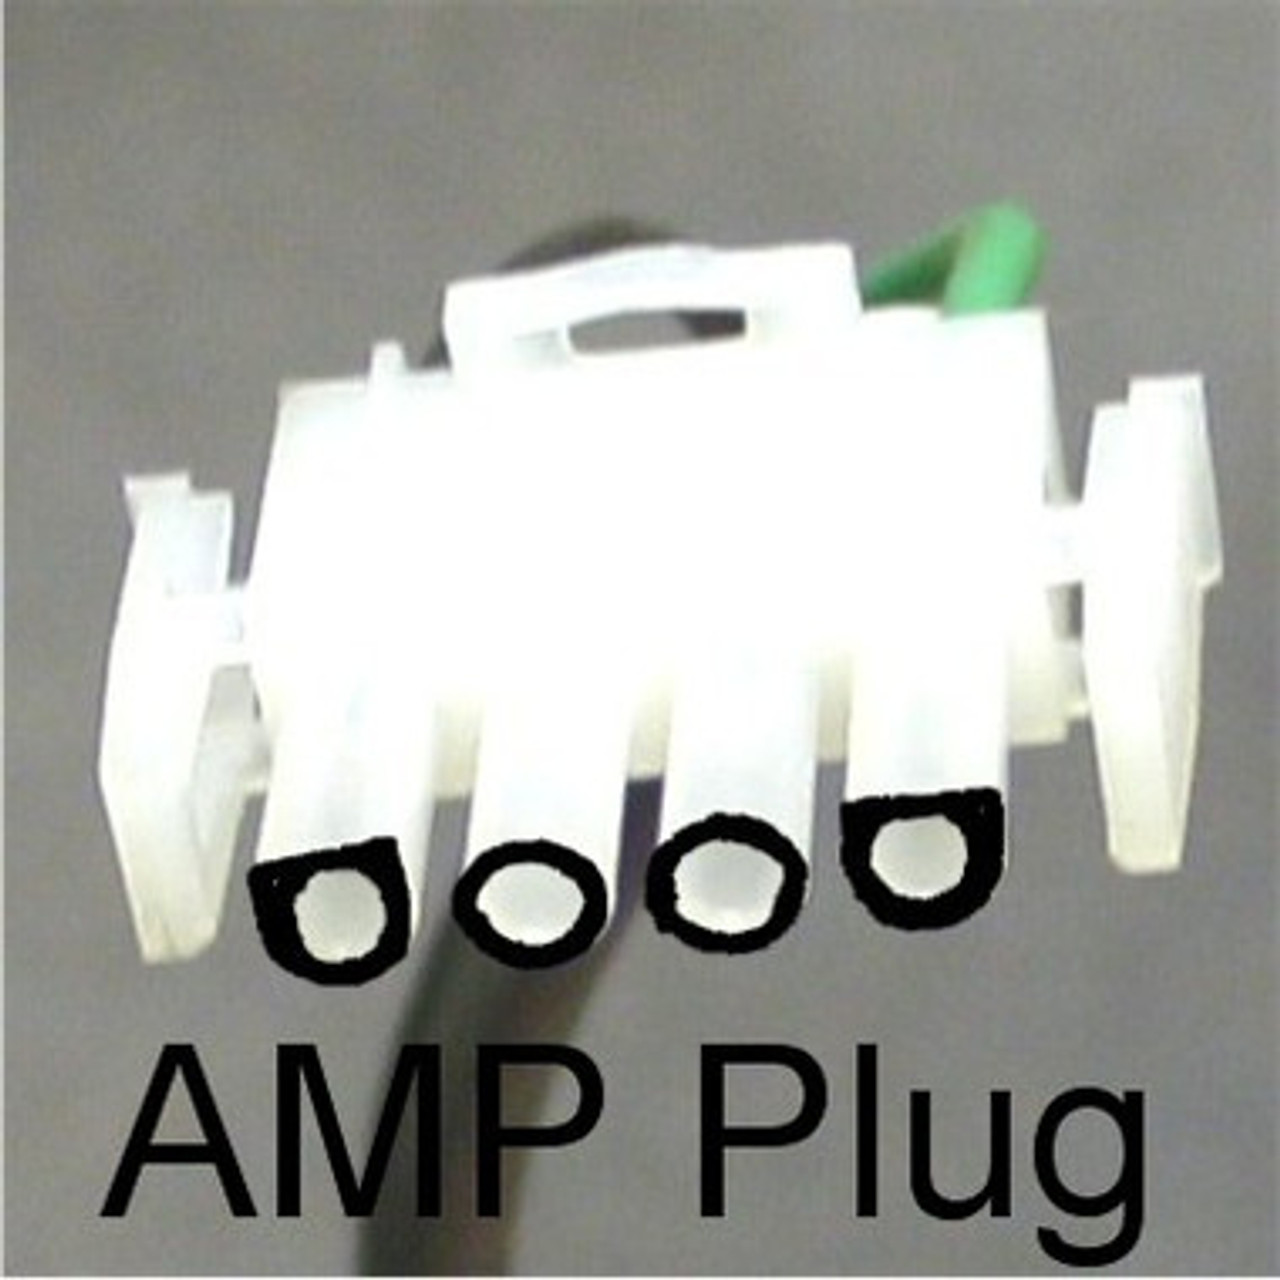 This is an Example of an AMP Plug showing the arrangement of the Flat spots on the two outer pins versus the colors...
On an AMP Plug left to right would be
(1) Speed Black Skip a Space White then Green..
(2) Speed Red, Black, White and Green...
Note: There are rare cases when the Red wire is Low Speed and Black is High in this case you would revers the order of the black and red... To determine this compare the black wire spade connector number on the schematic on the old motor to the speed it corresponds to before unhooking to move the wire to the new motor..